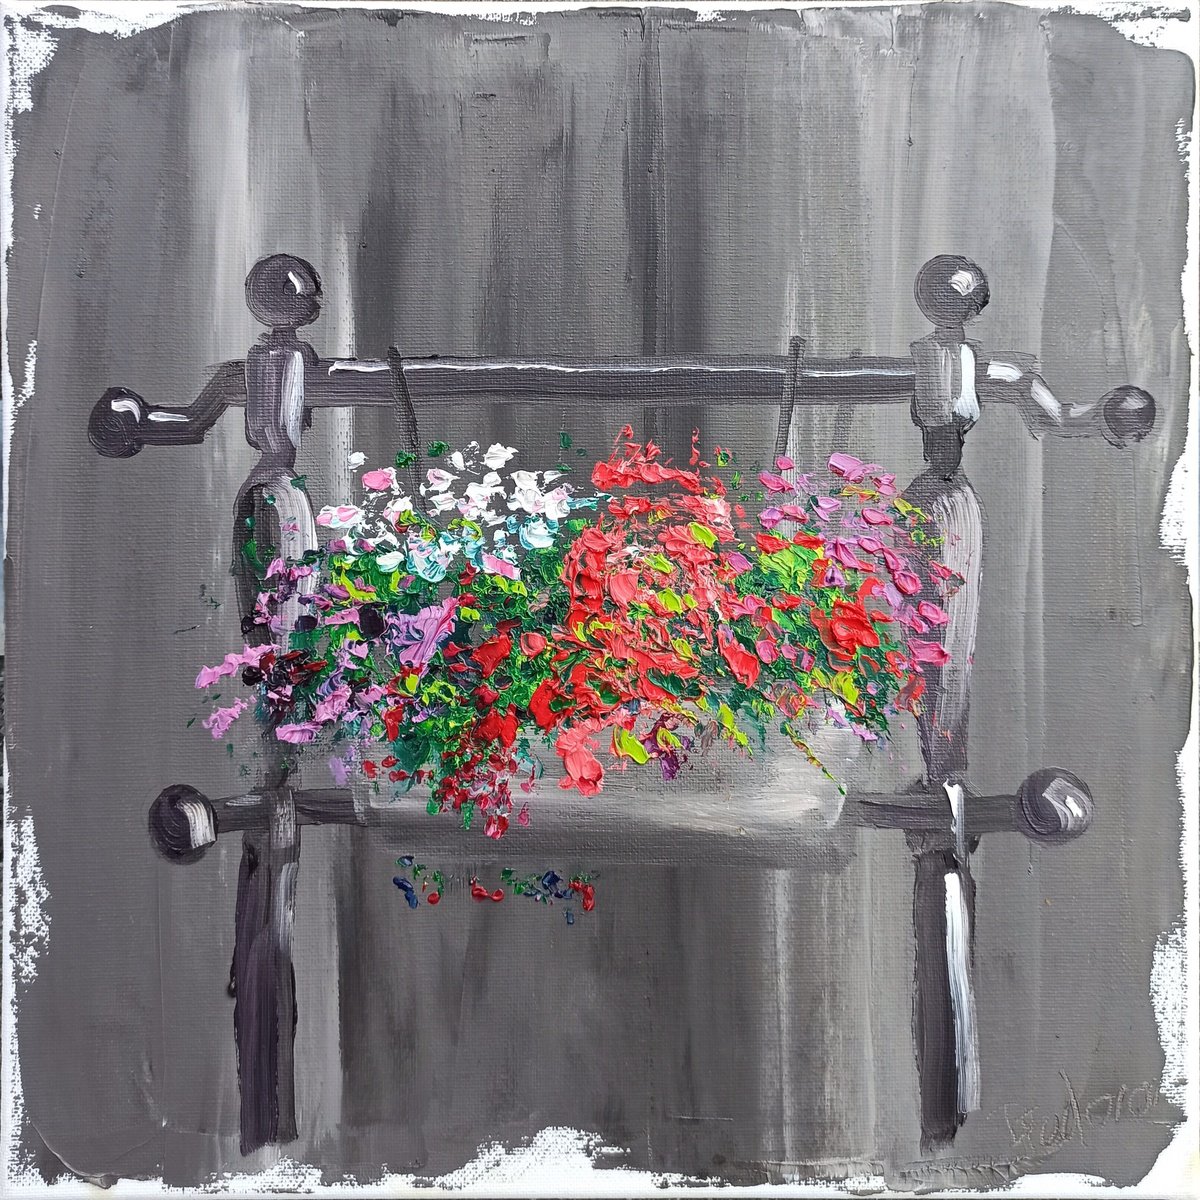 The flowers in the pot by the entrance. Plein air painting by Dmitry Fedorov